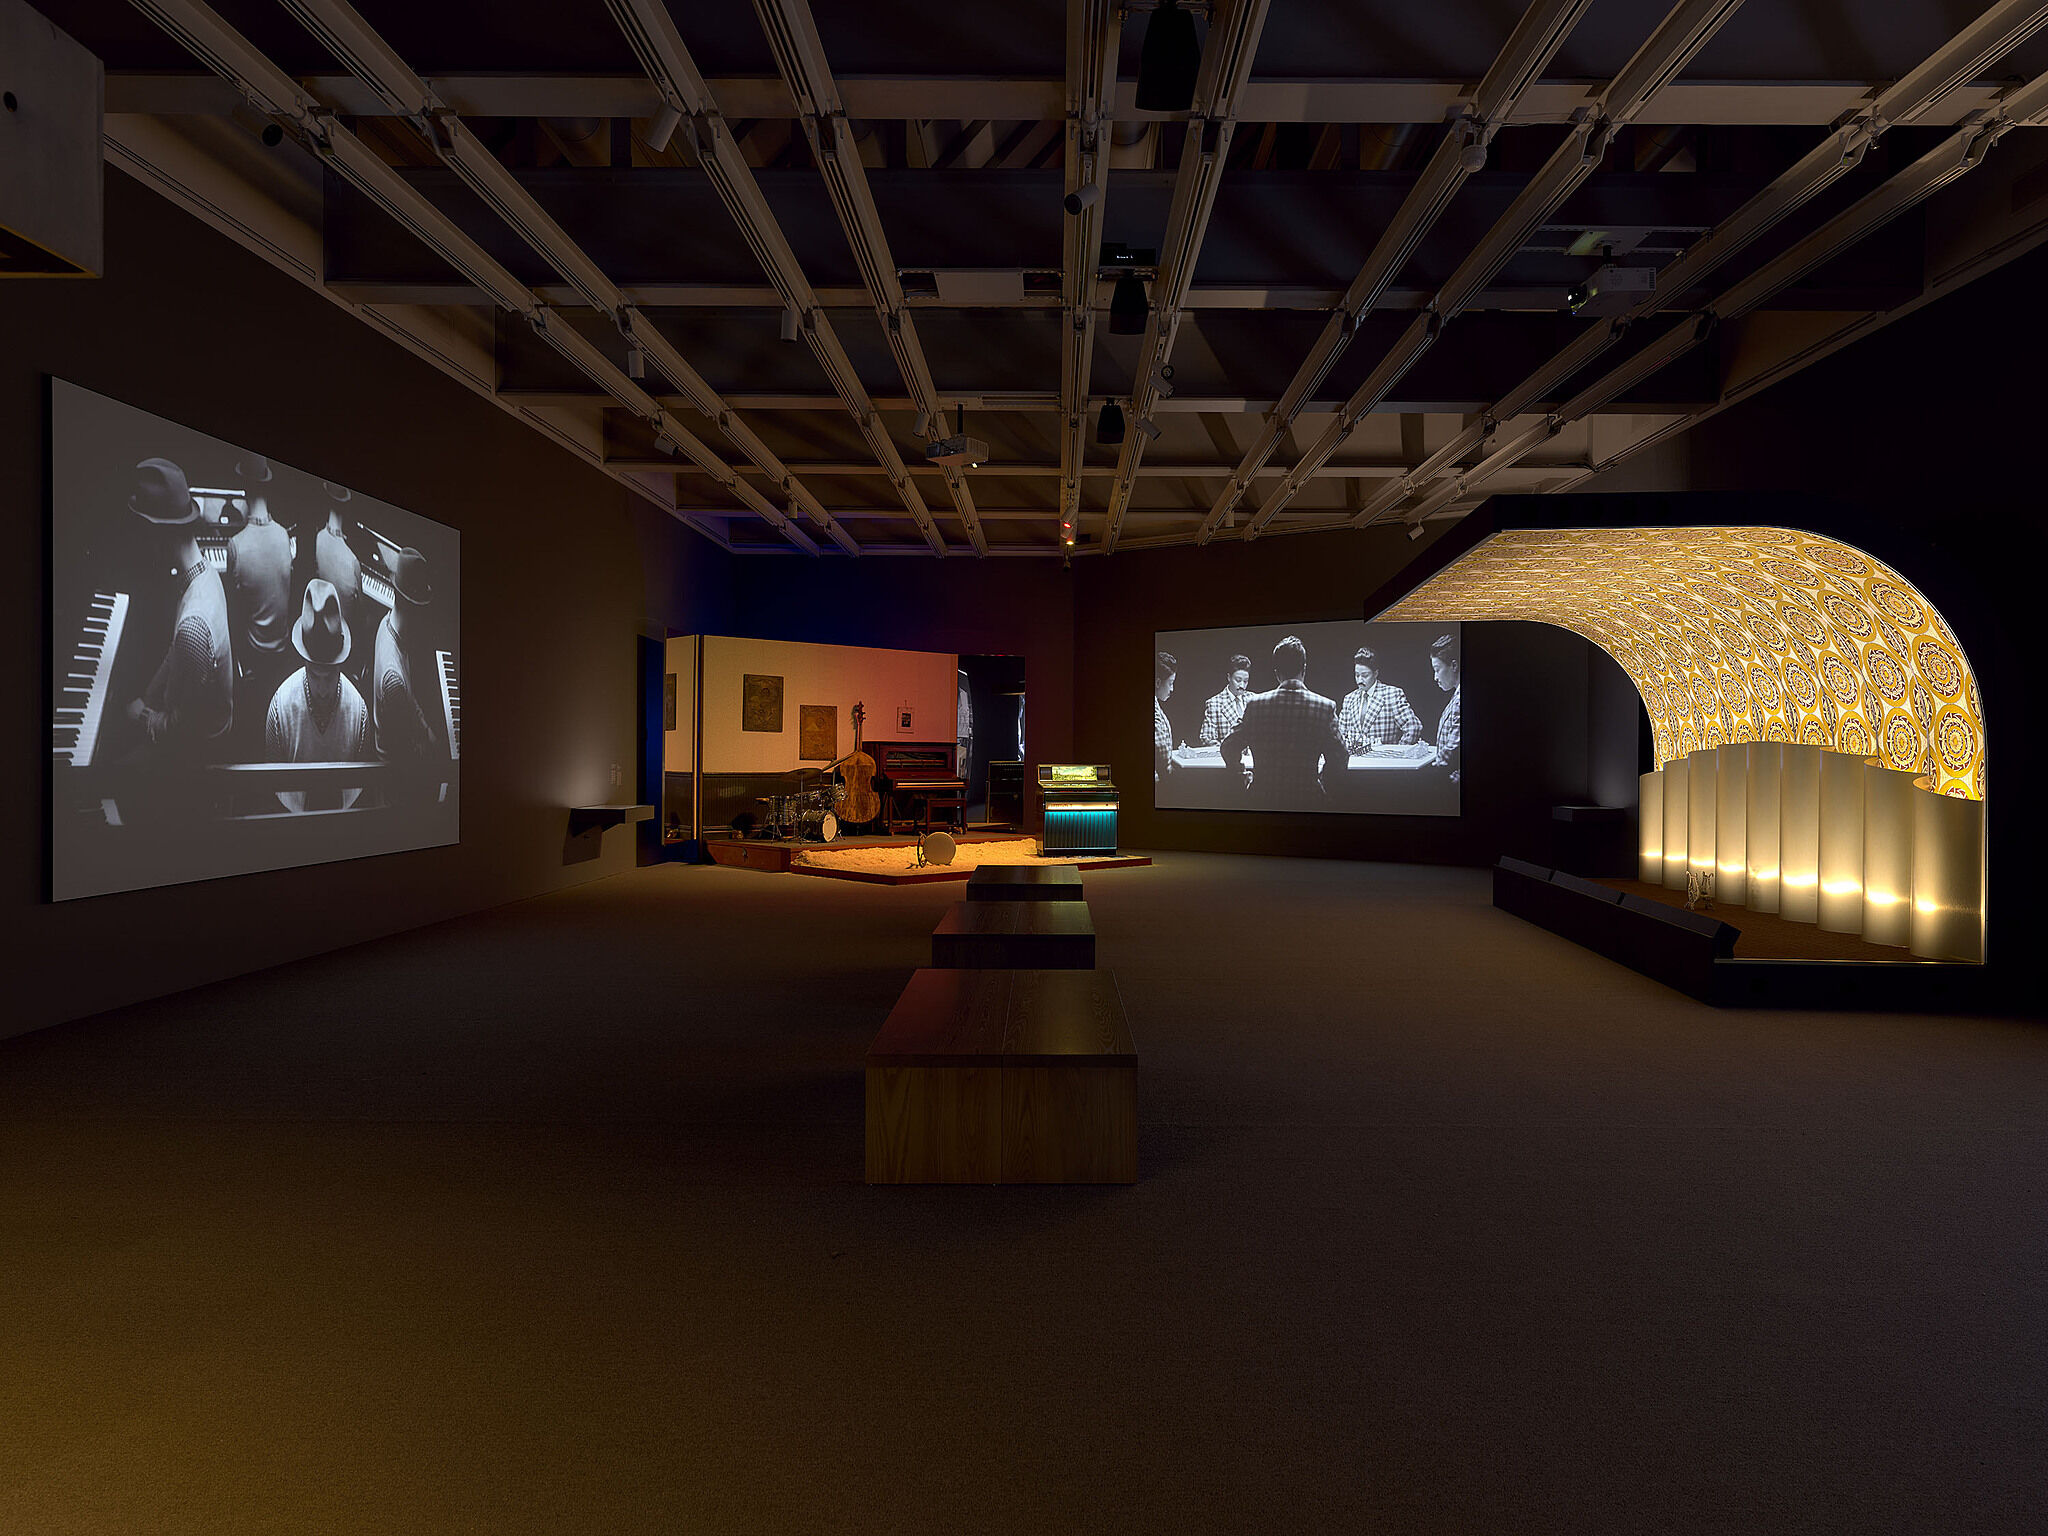 An image of a gallery with three stages and various musical instruments and video projections.